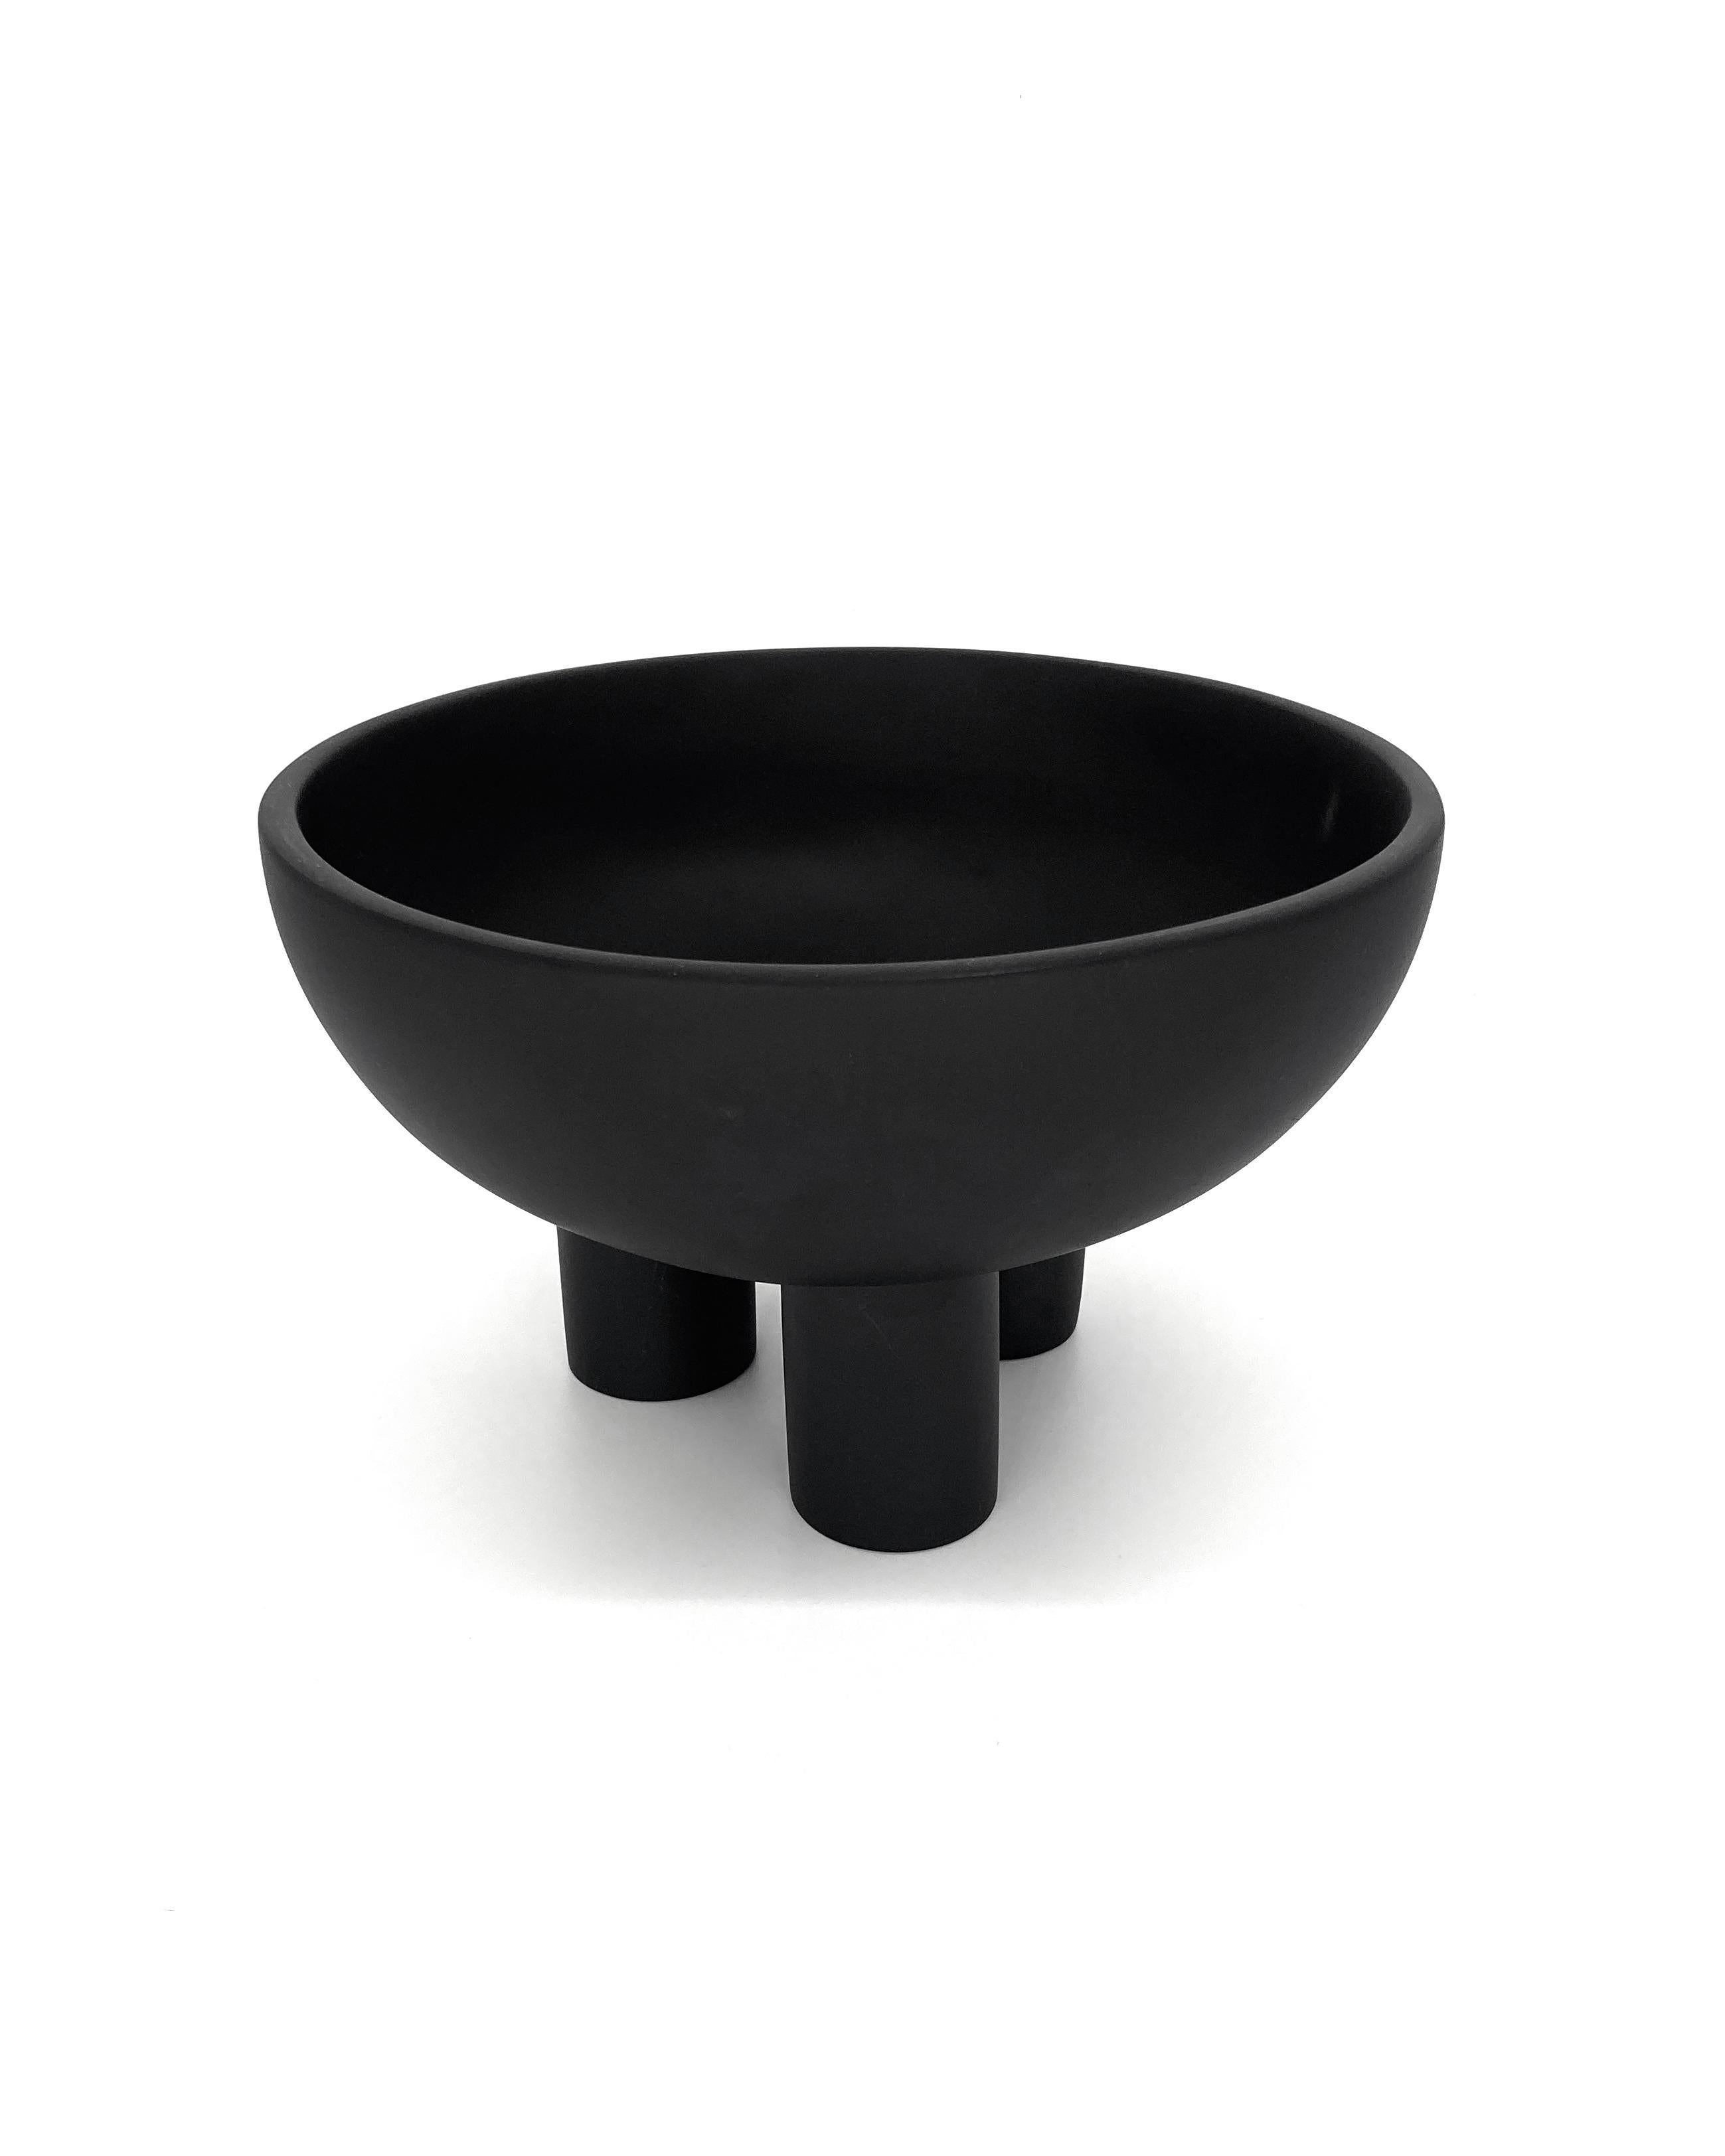 Mexican Atlixco Black Resin Triple Footed Pedestal Bowl